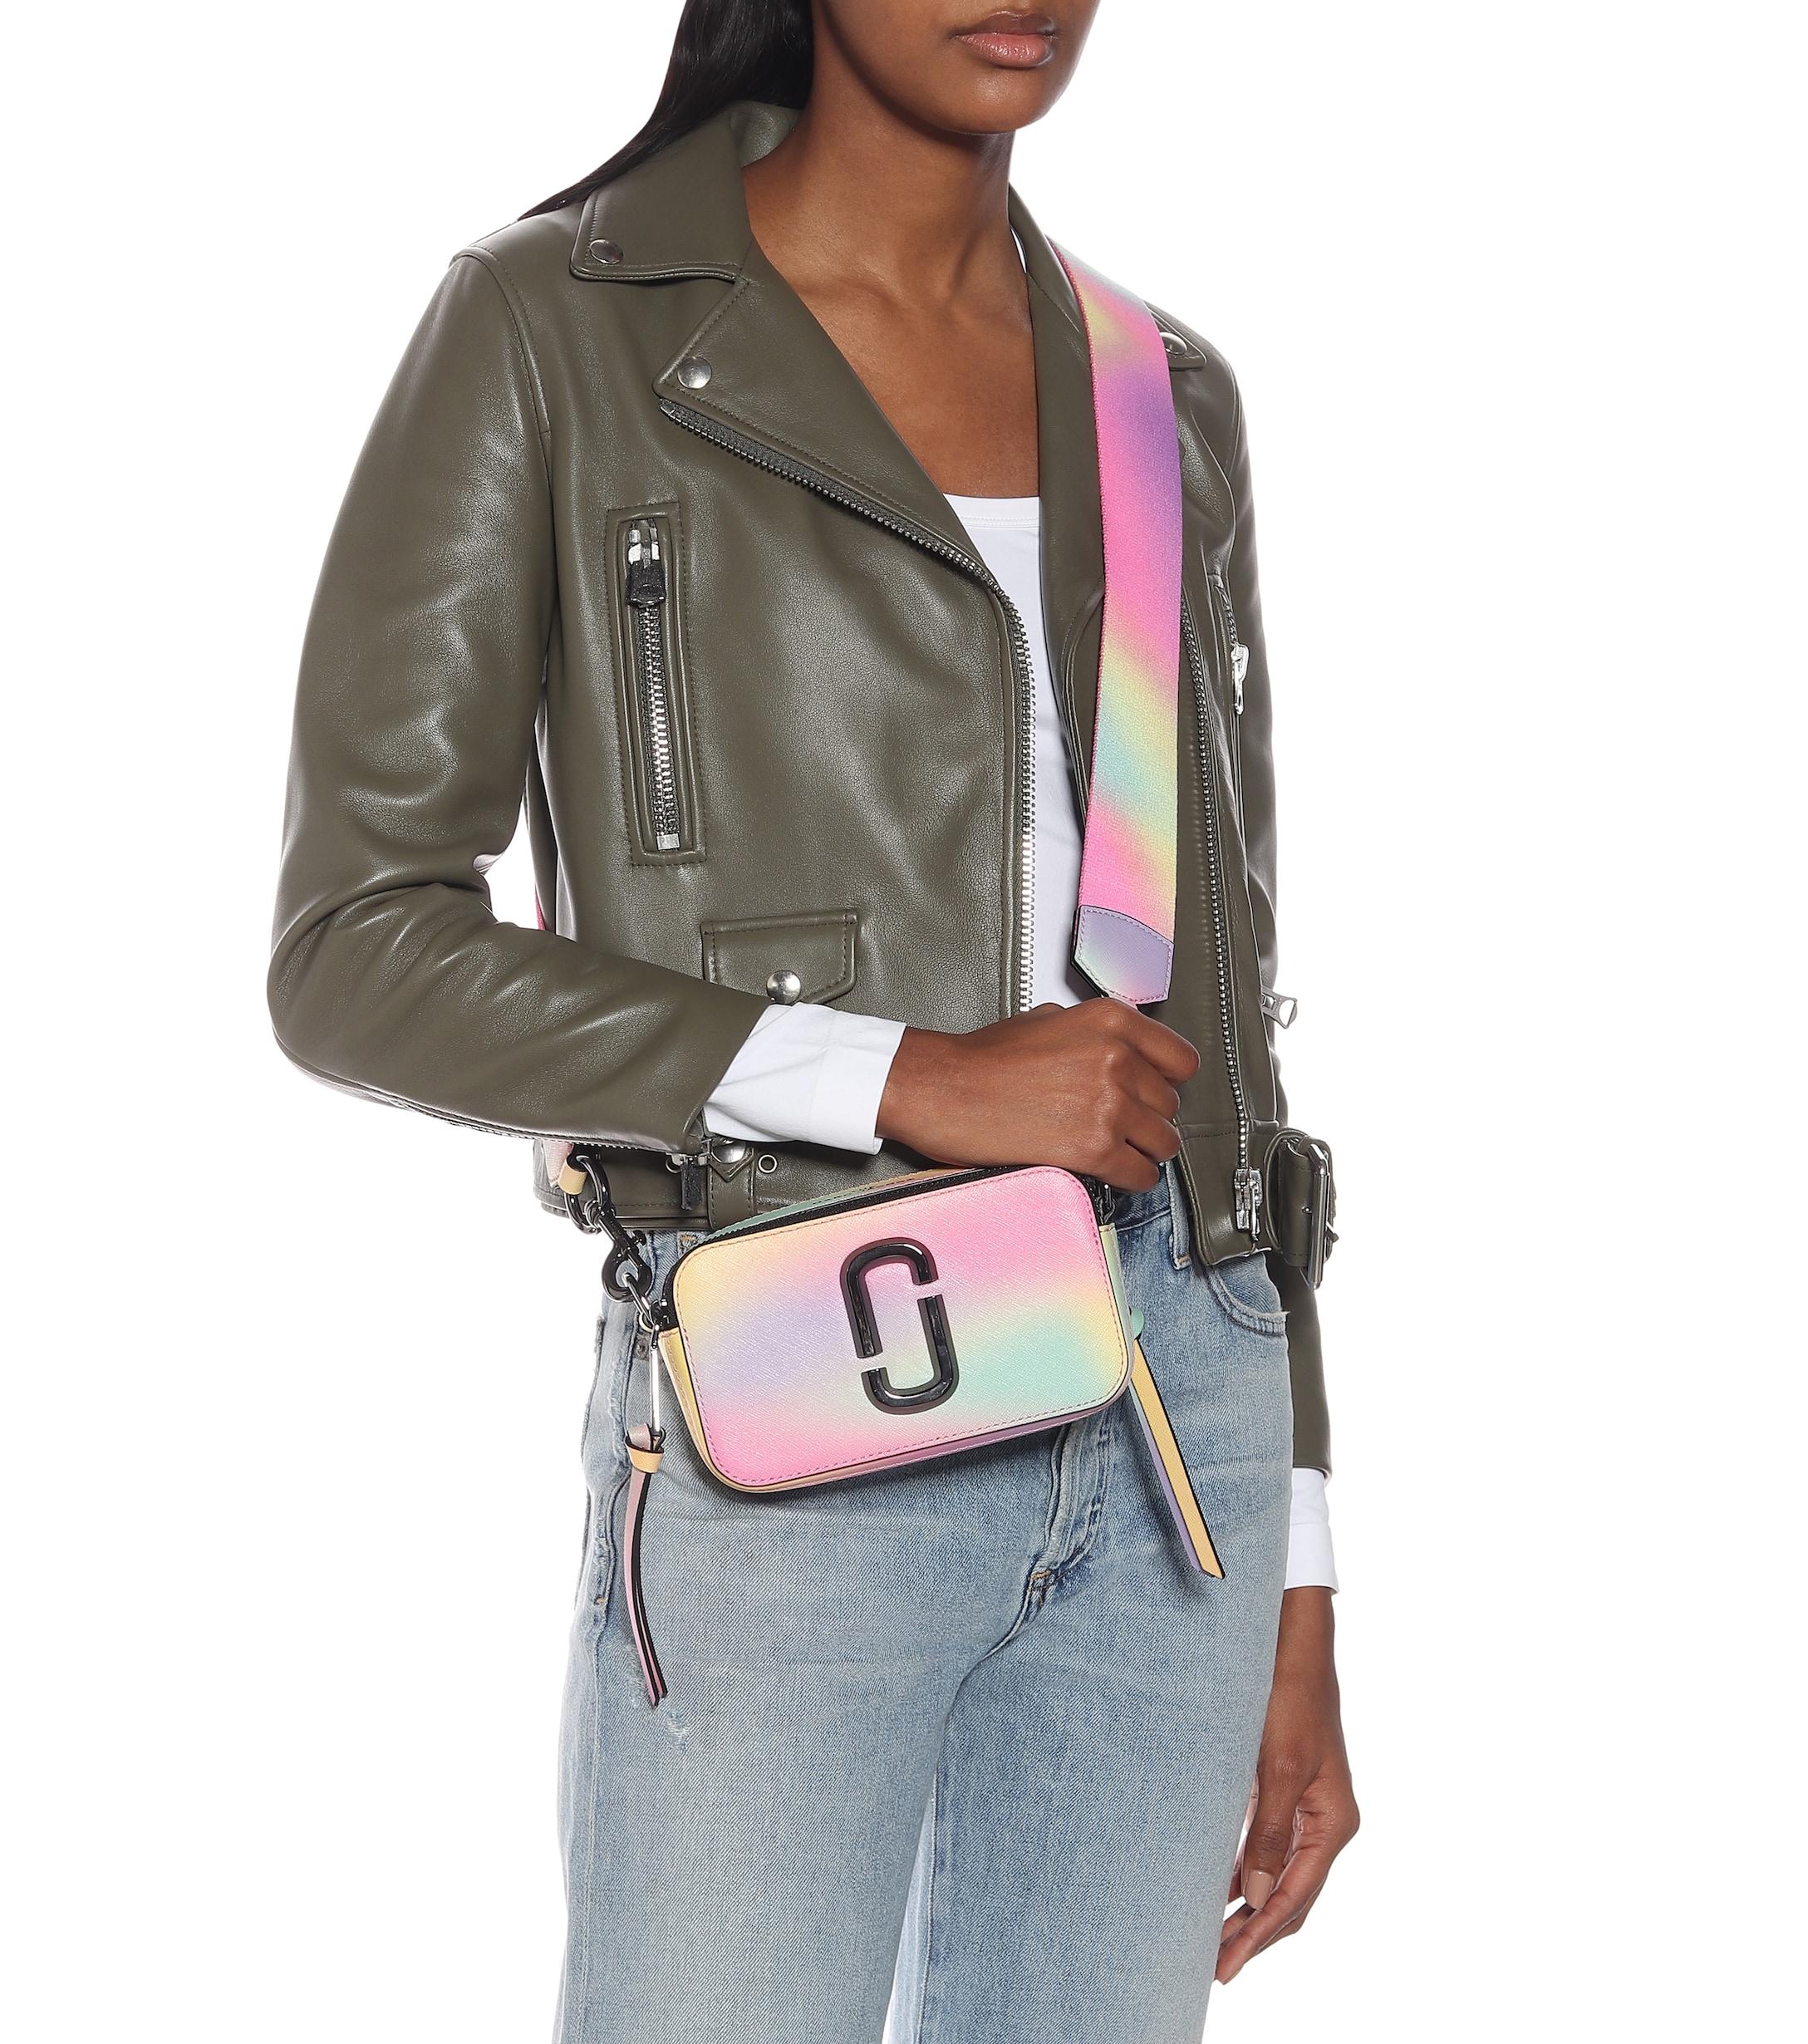 The Snapshot Airbrushed Bag by Marc Jacobs Handbags for $73